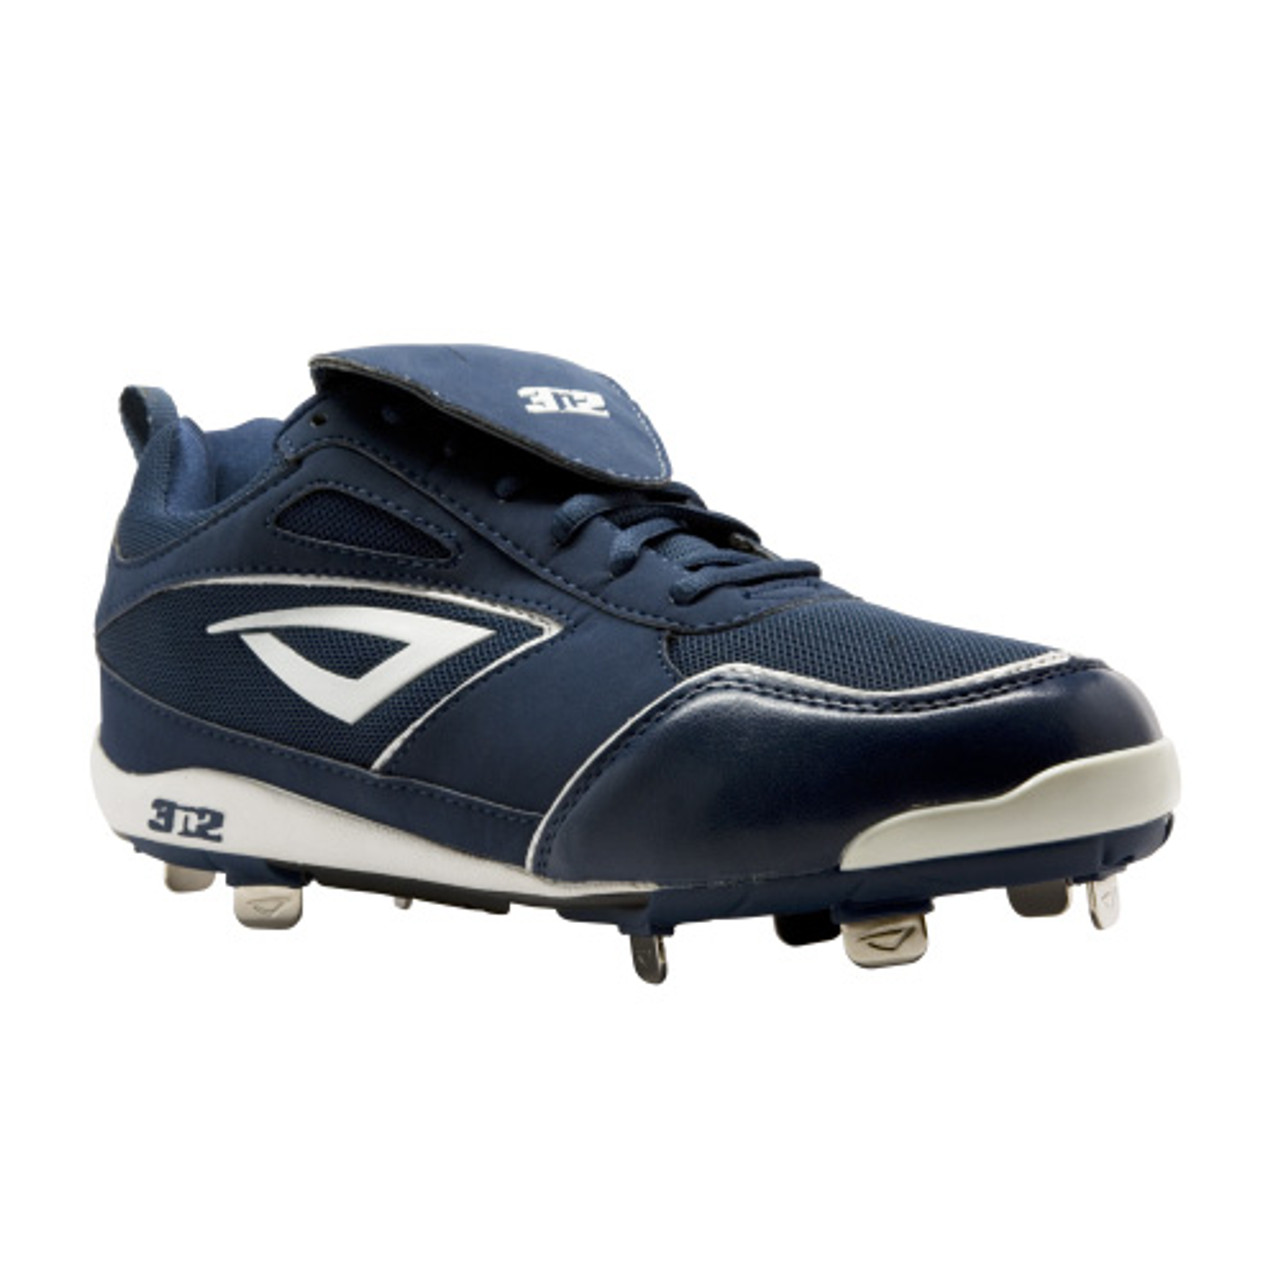 Rally Metal Fastpitch Softball Cleats 